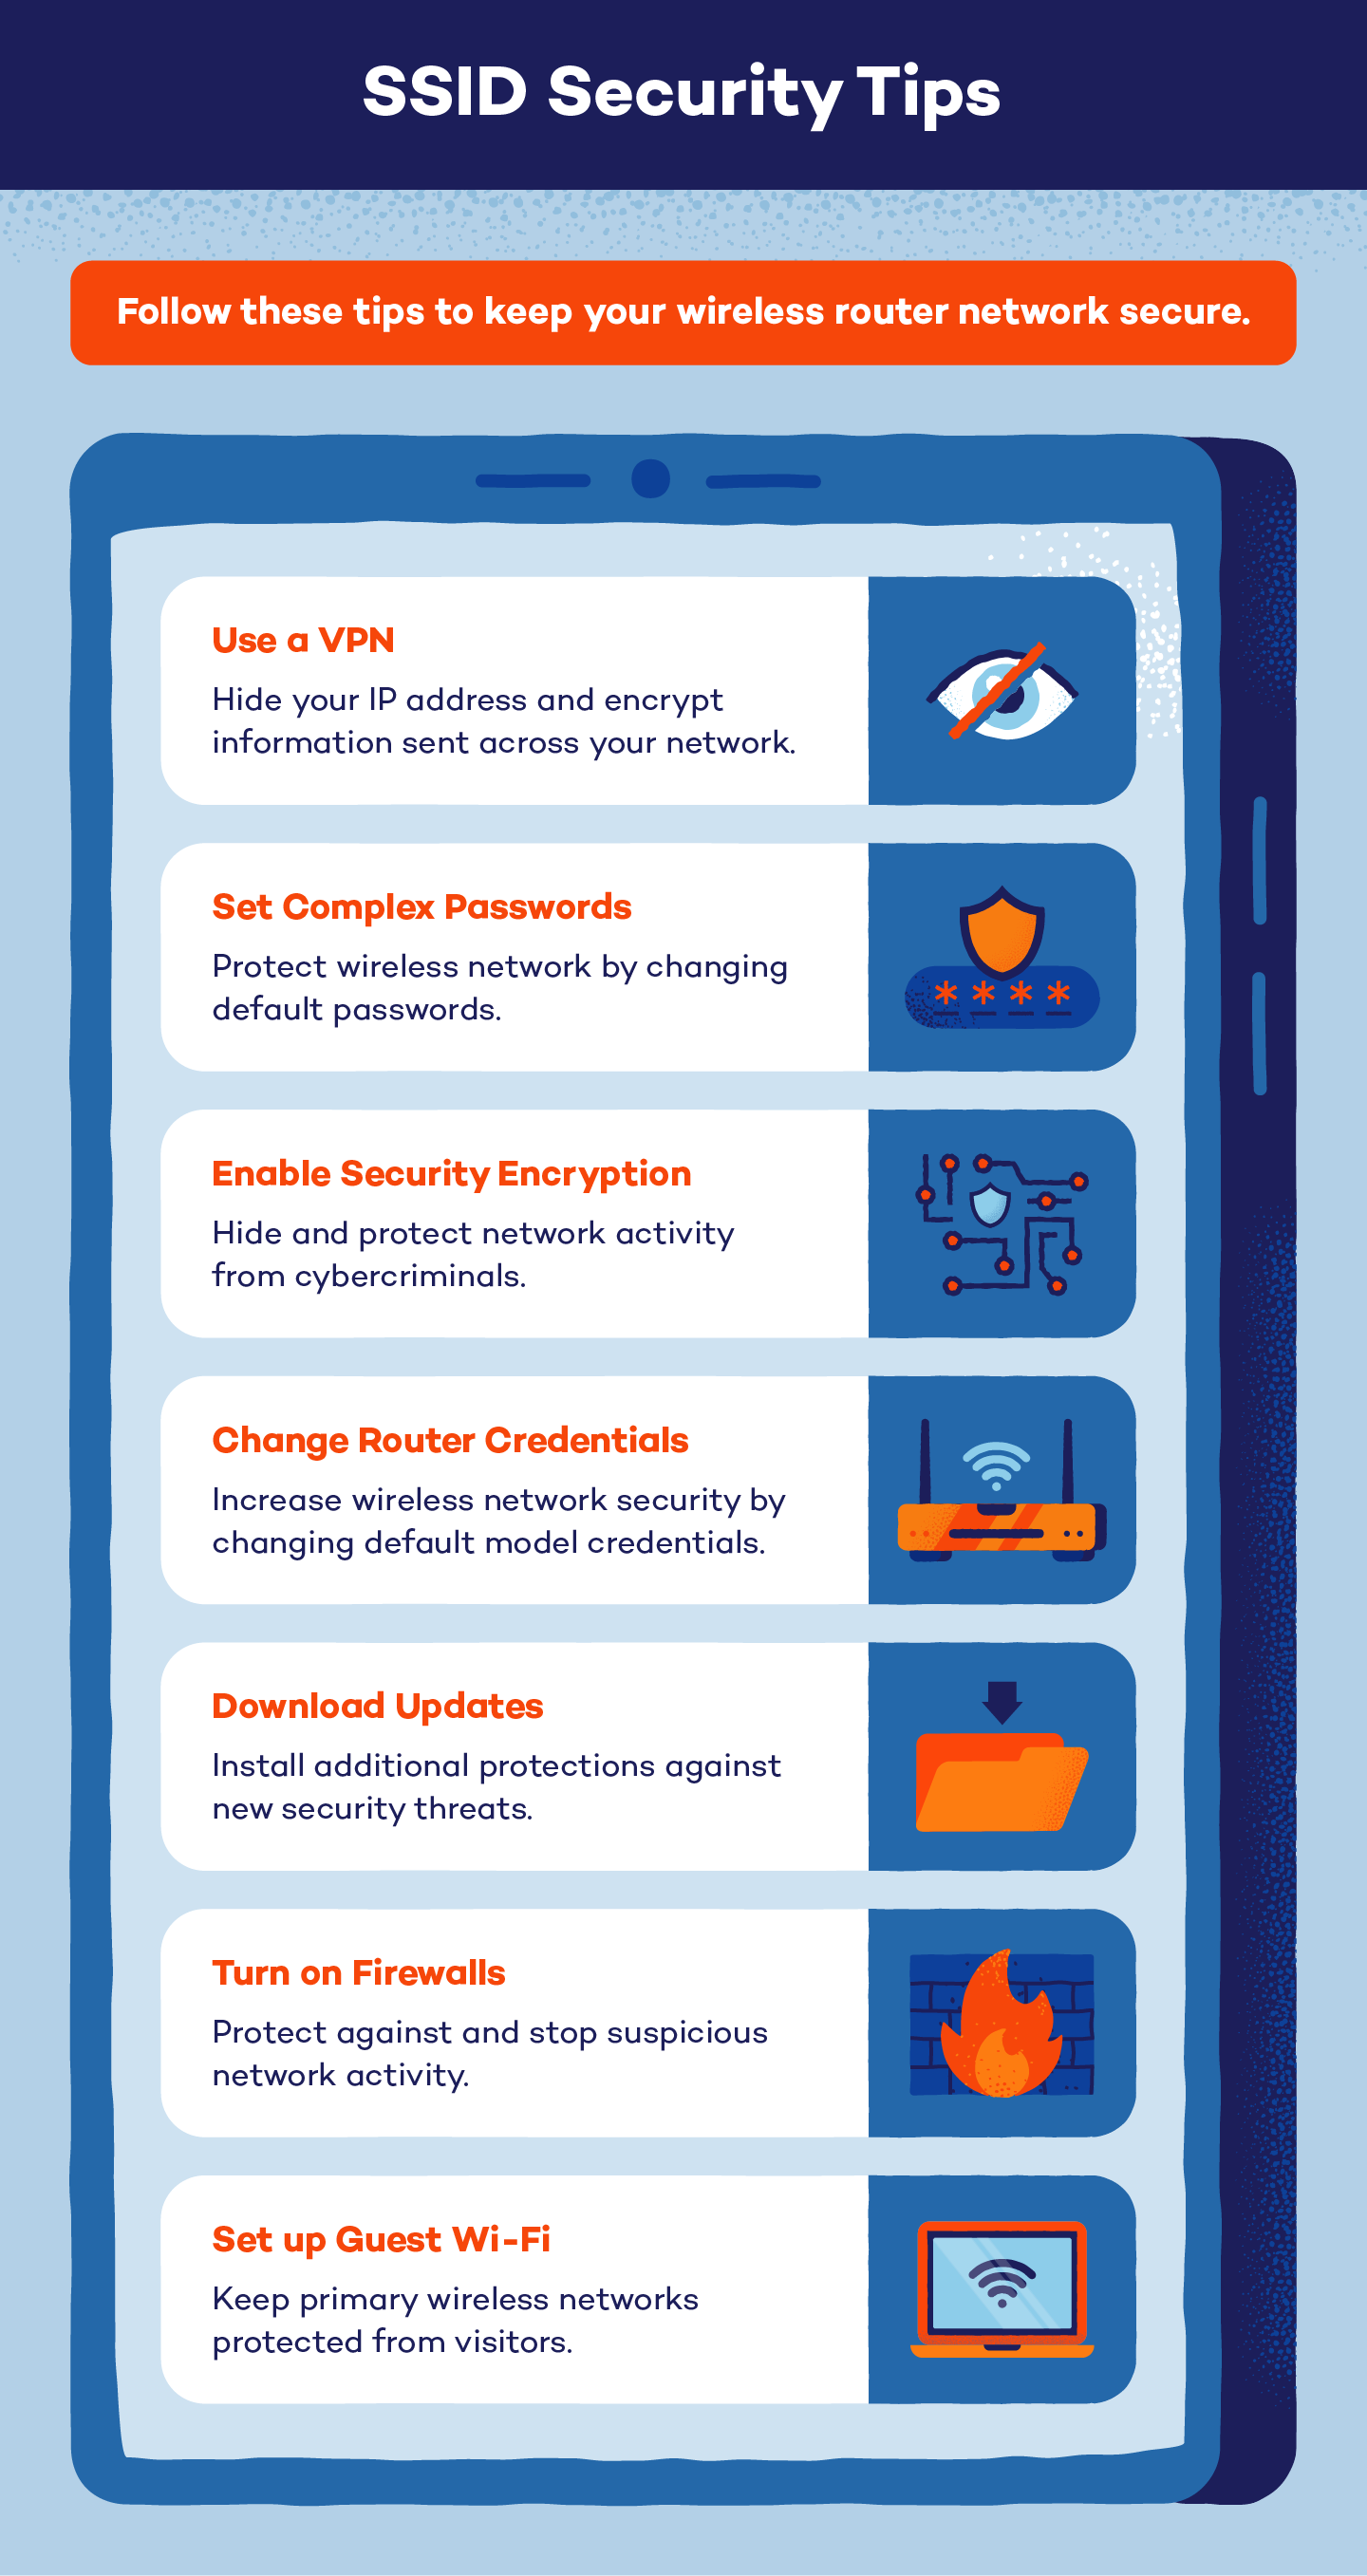 Illustration of a mobile phone with 7 security tips for SSIDs.